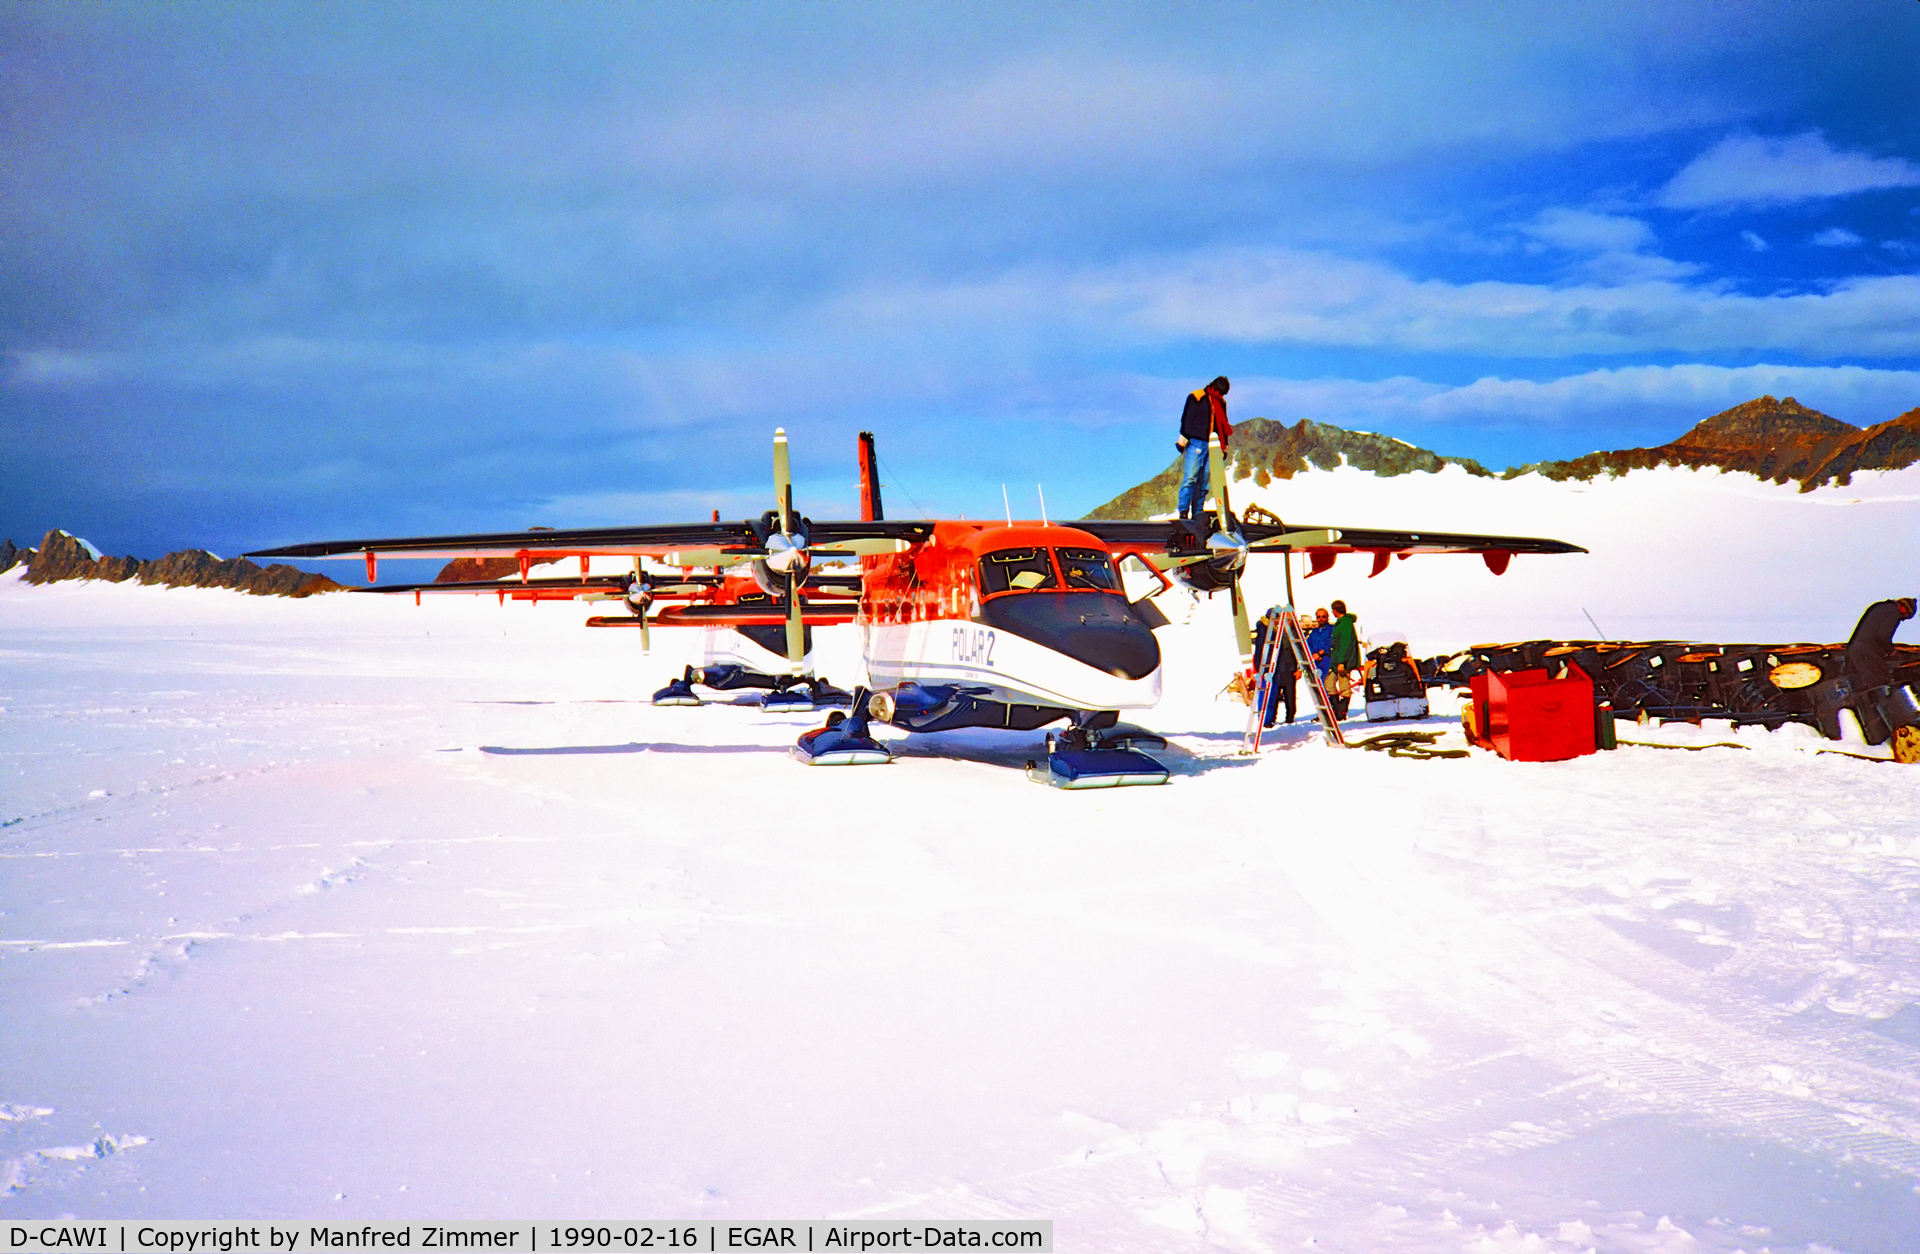 D-CAWI, 1983 Dornier 228-101 C/N 7014, February 1990, Fuelstop at Rothera, Adelaide Island, Antarctica